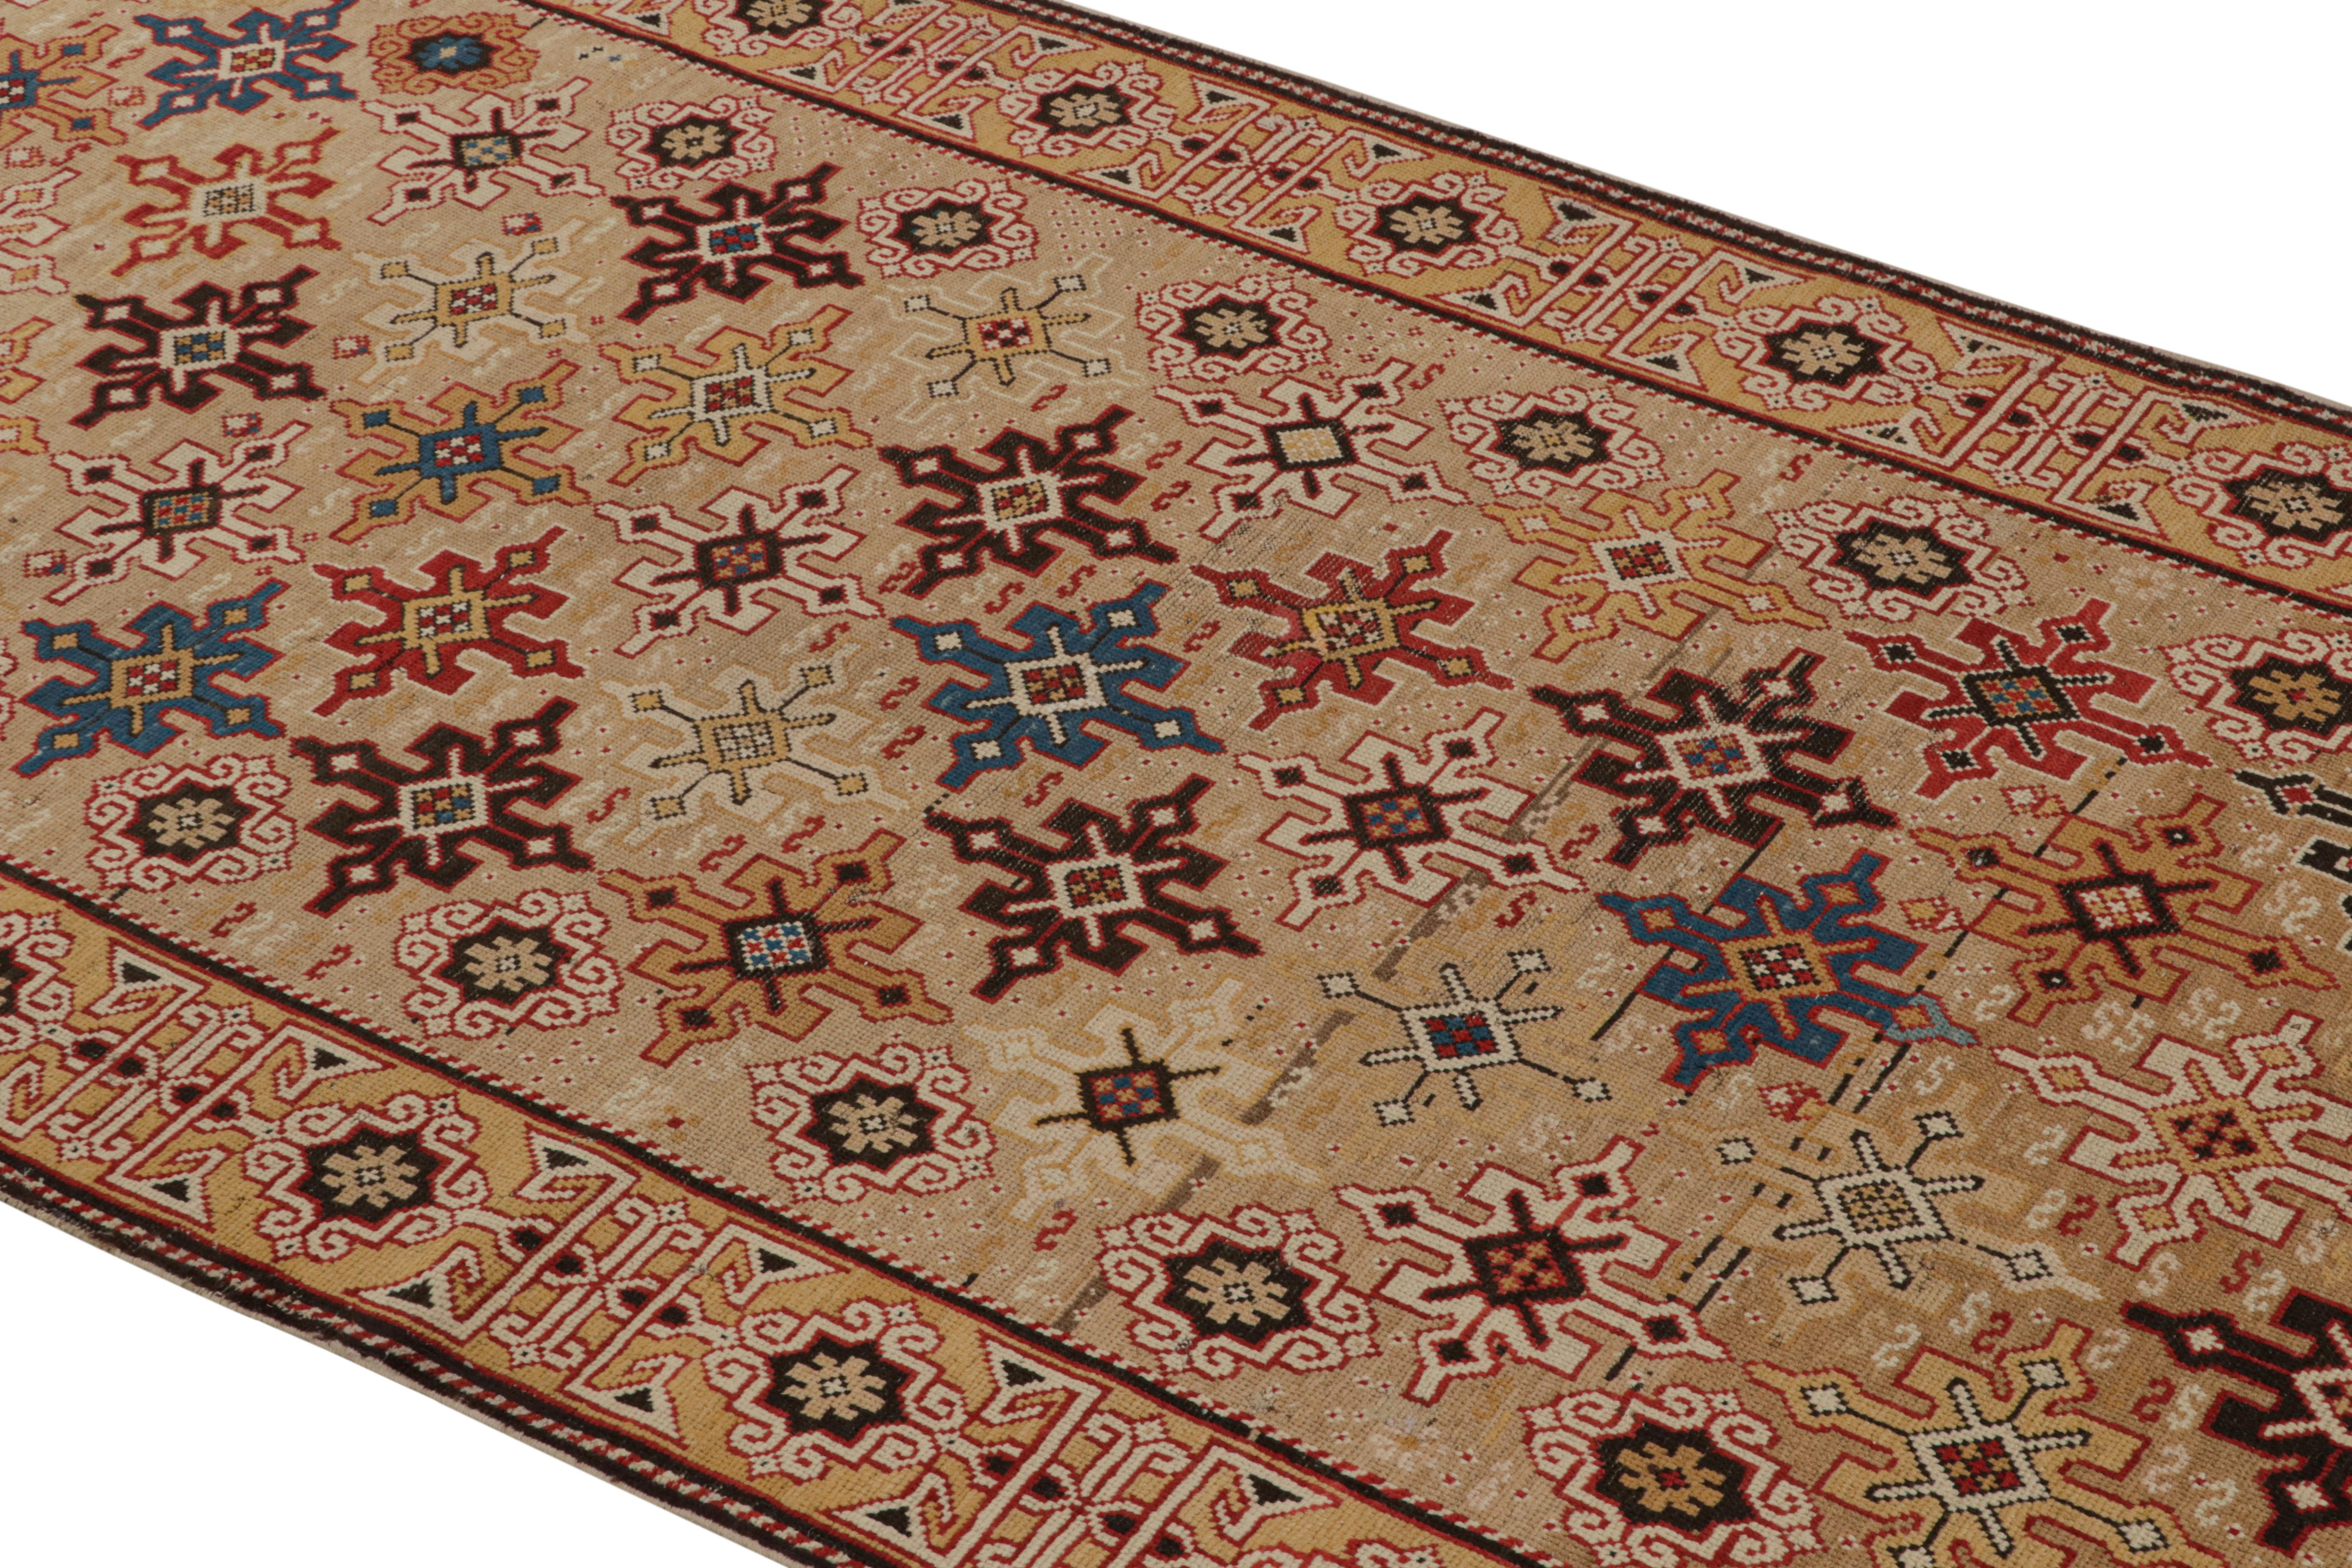 Originating from Russia between 1880-1890, this antique geometric runner enjoys a wrapping border and unique Kuba field design characterized by repeating crimson, blue, black, tan, and golden-yellow eight-pointed stars against an exceptionally rare,